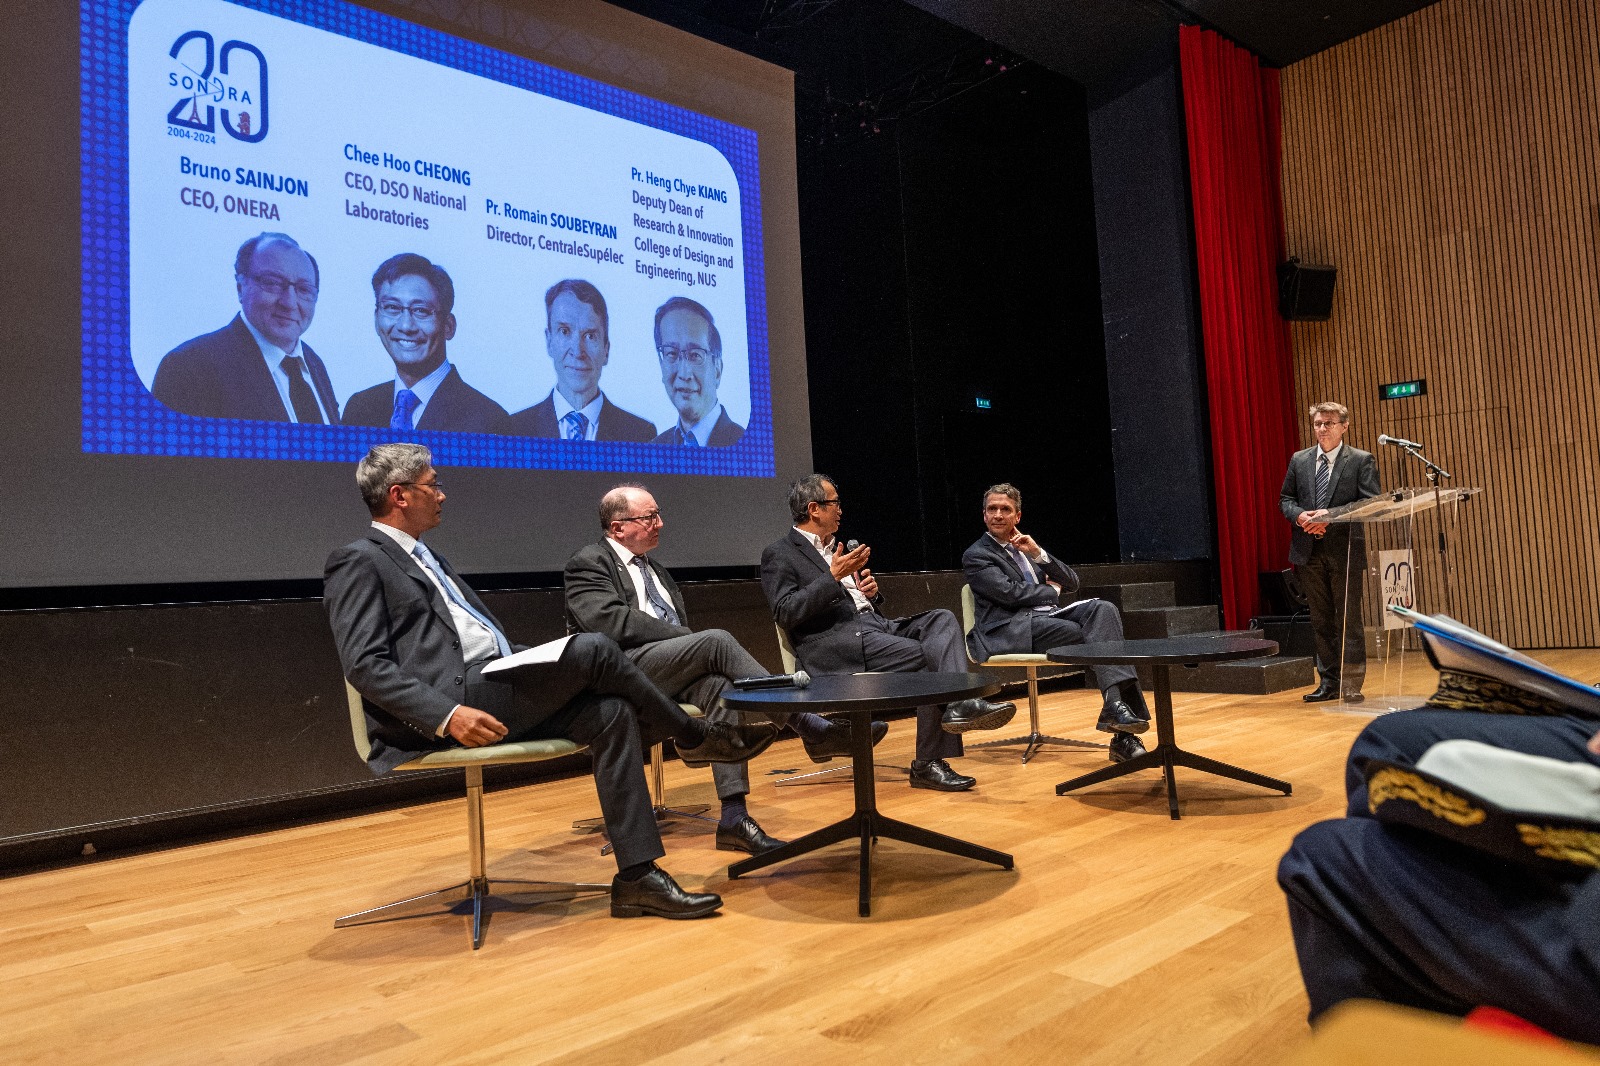 From left to right: Mr Cheong Chee Hoo, CEO, DSO National Laboratories; Mr Bruno Sainjon, CEO, ONERA; Prof Heng Chye Kiang, Deputy Dean (Research and Innovation); and Mr Romain Soubeyran, President, CentraleSupélec.